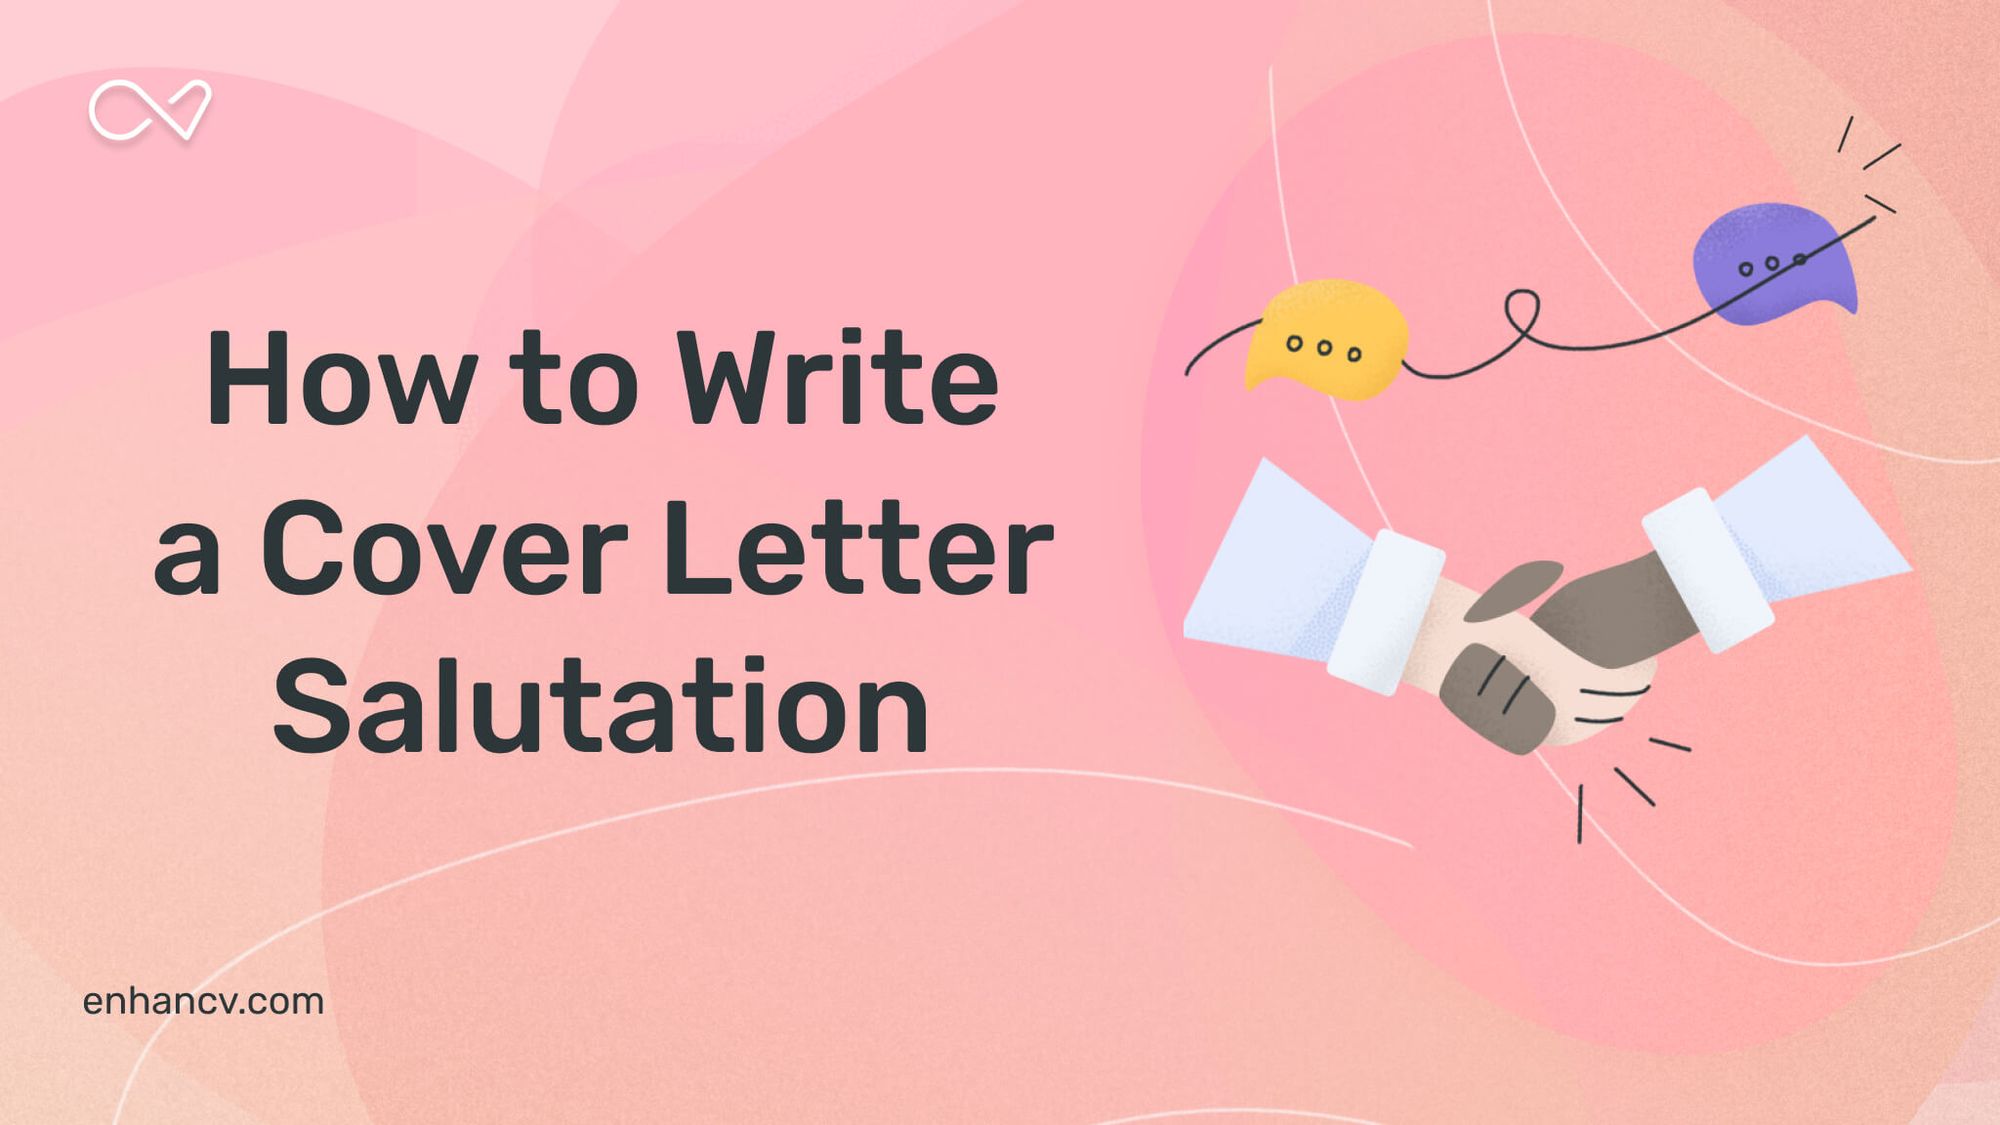 salutation meaning in cover letter